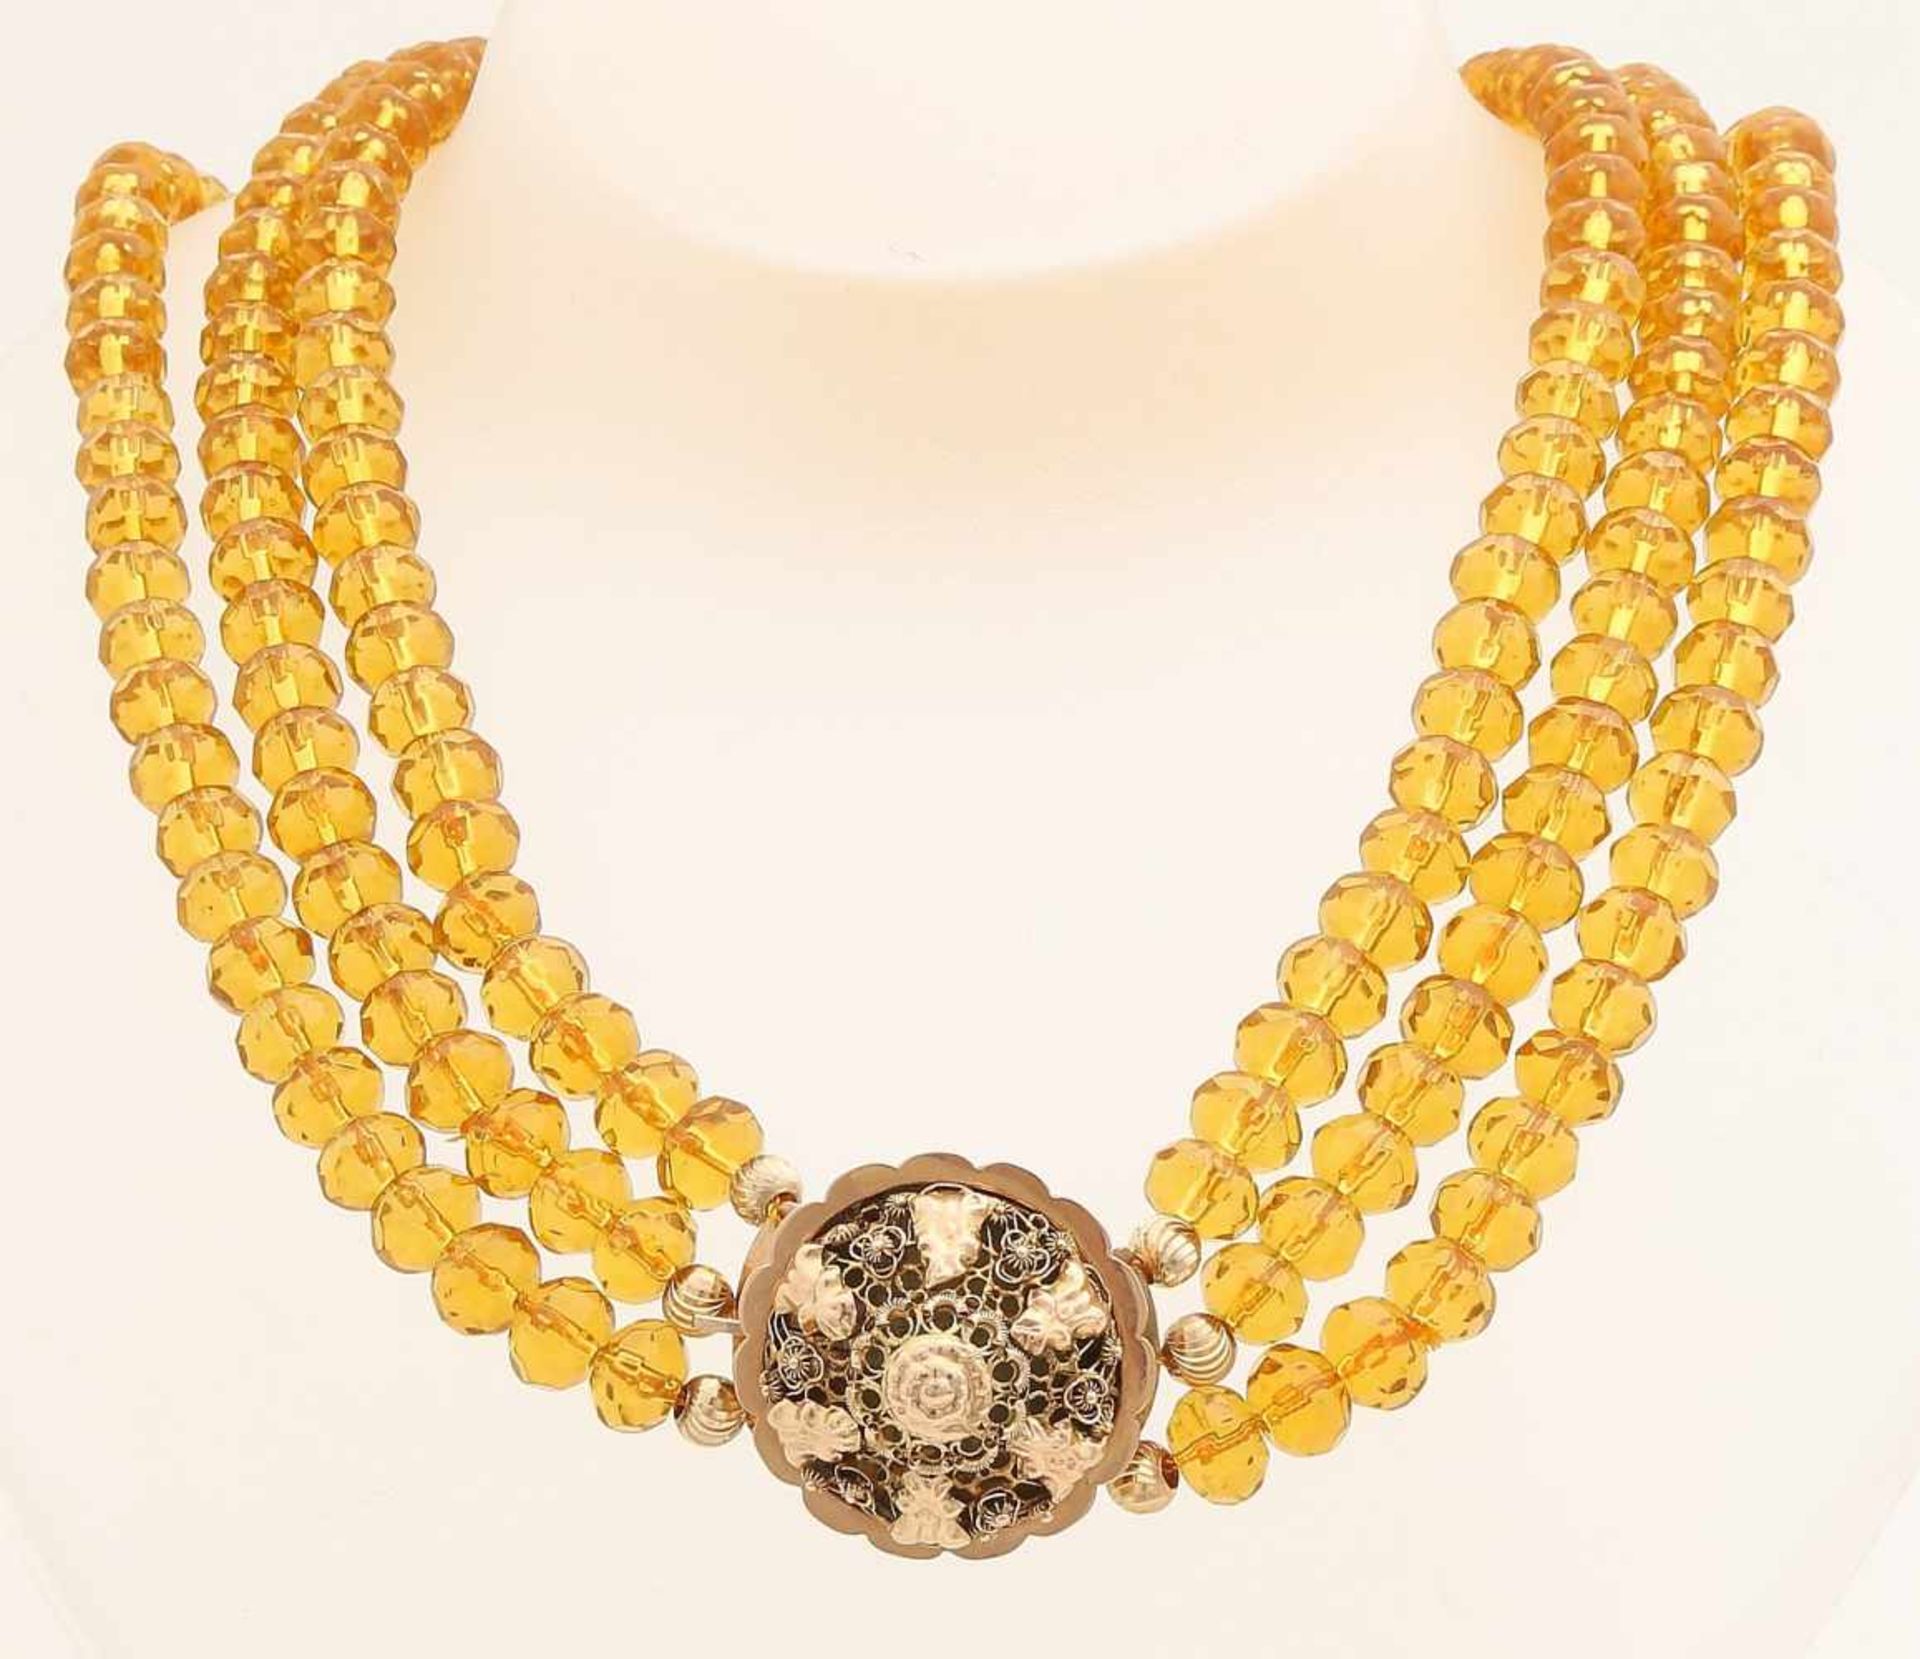 Collier citrine region lock yellow gold, 585/000. Necklace with three rows of faceted citrine beads,